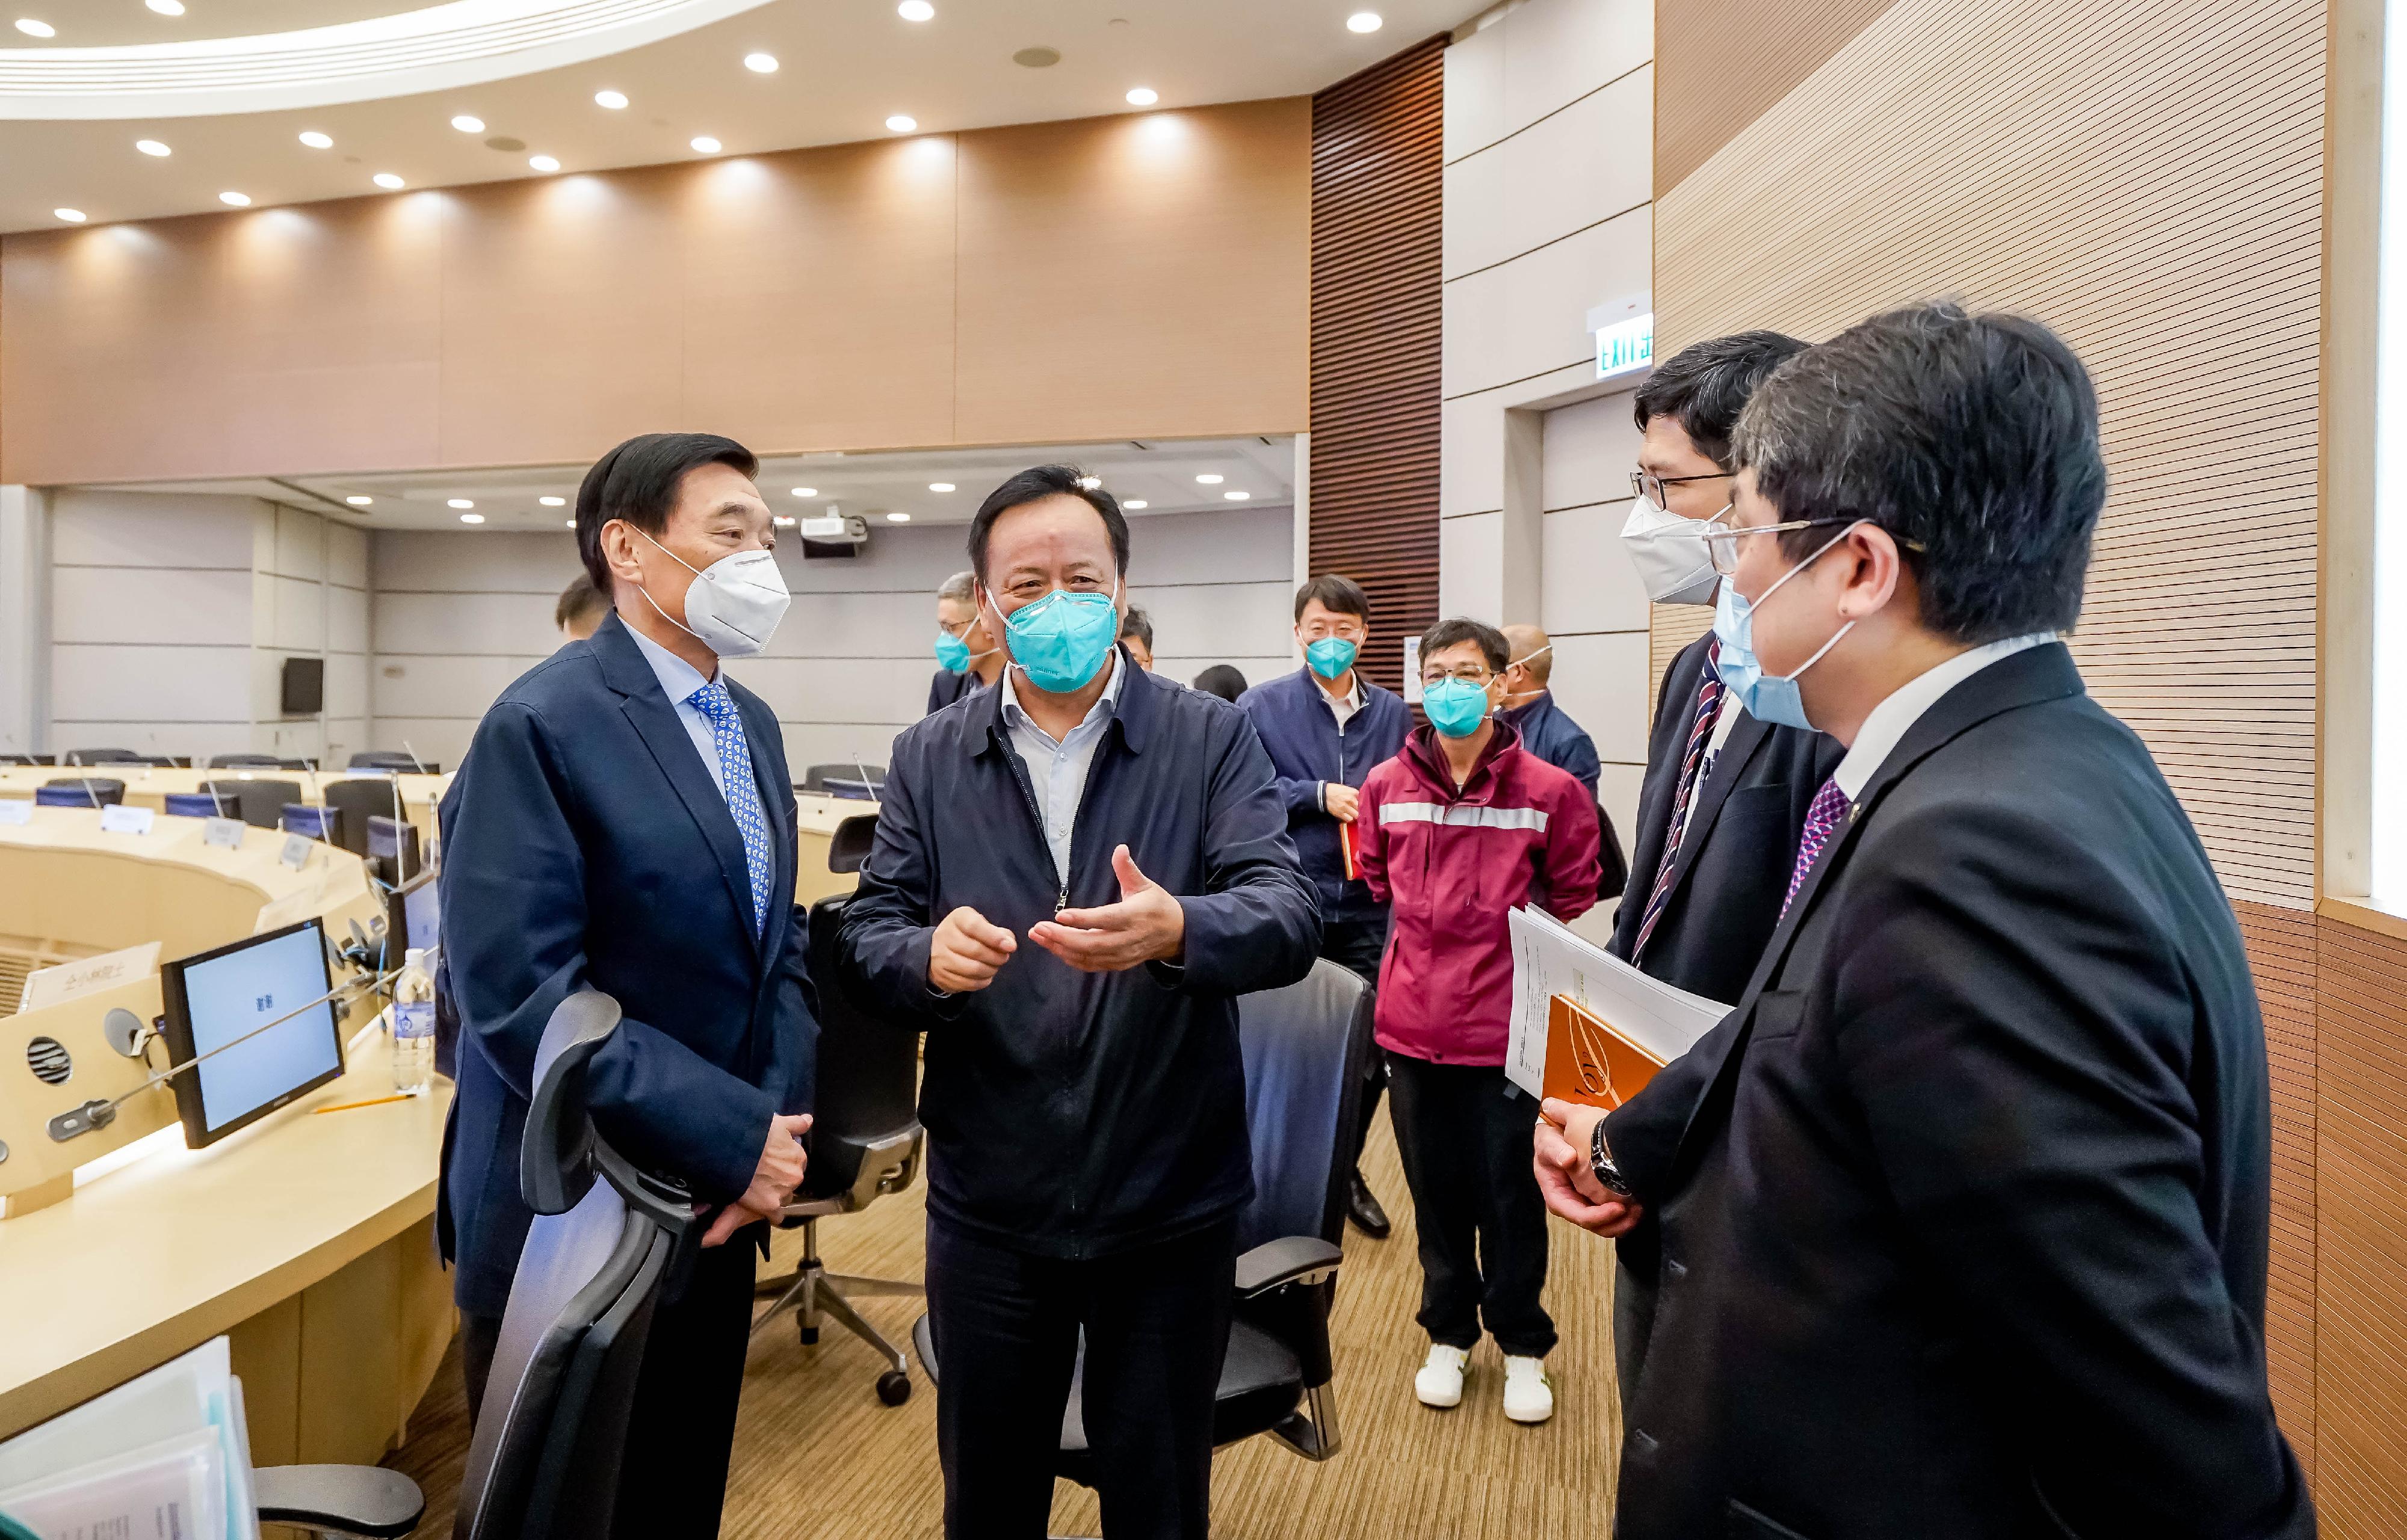 The Mainland Chinese medicine expert group of the Central Authorities met with the Hospital Authority representatives this morning (March 31) to exchange views on the application of Chinese medicine in managing COVID-19 patients.